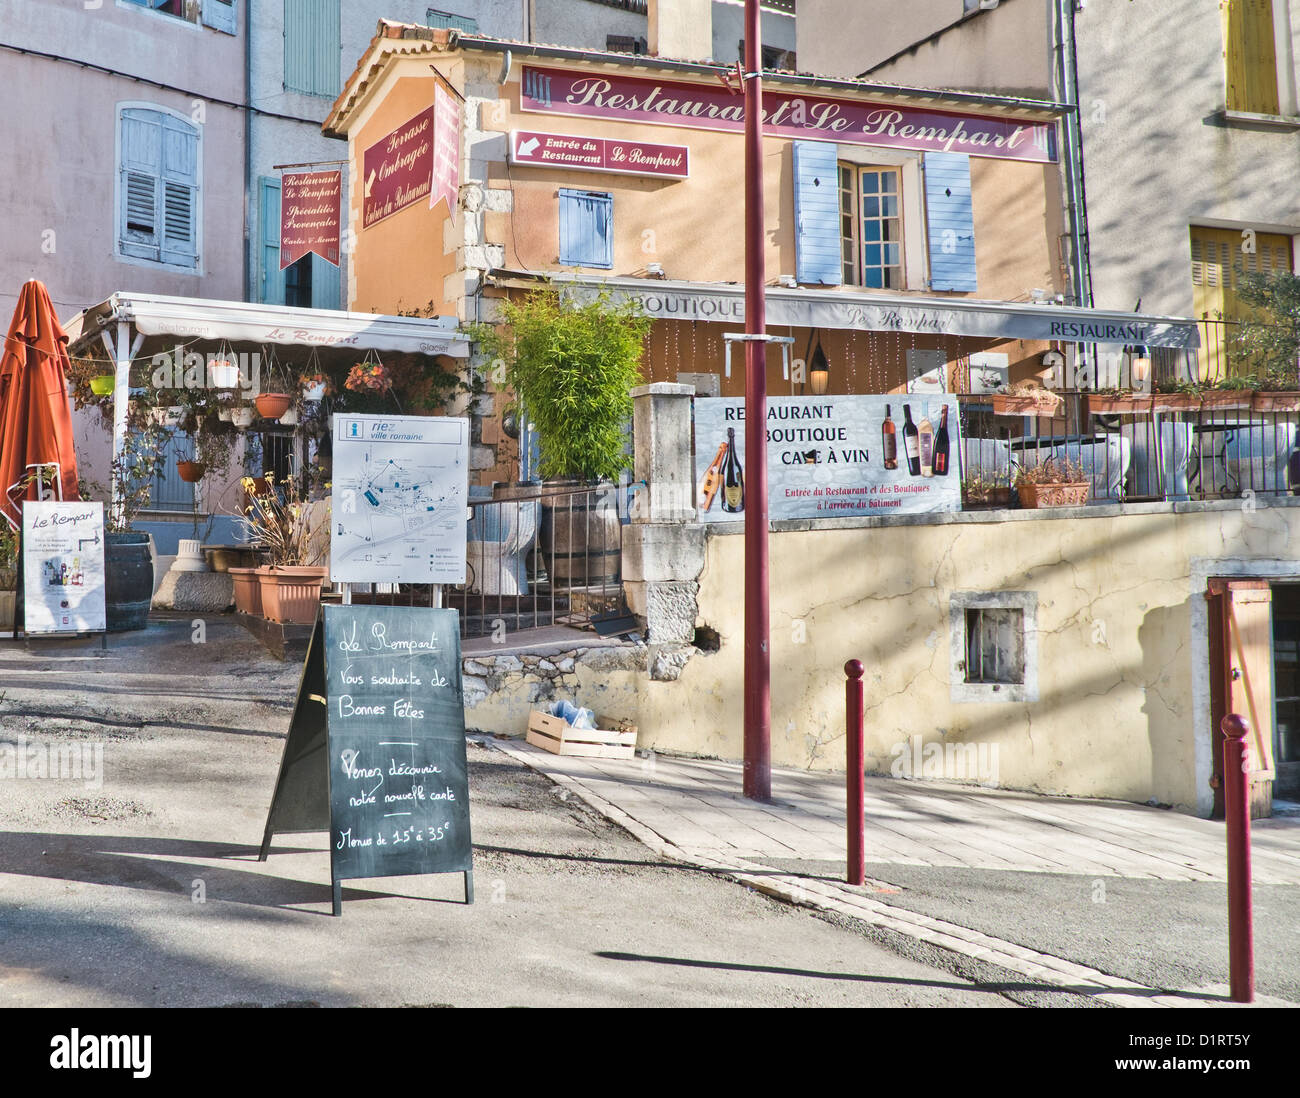 A street scene of Restaurant le Rempart in the small Roman village of Riez in France. Stock Photo